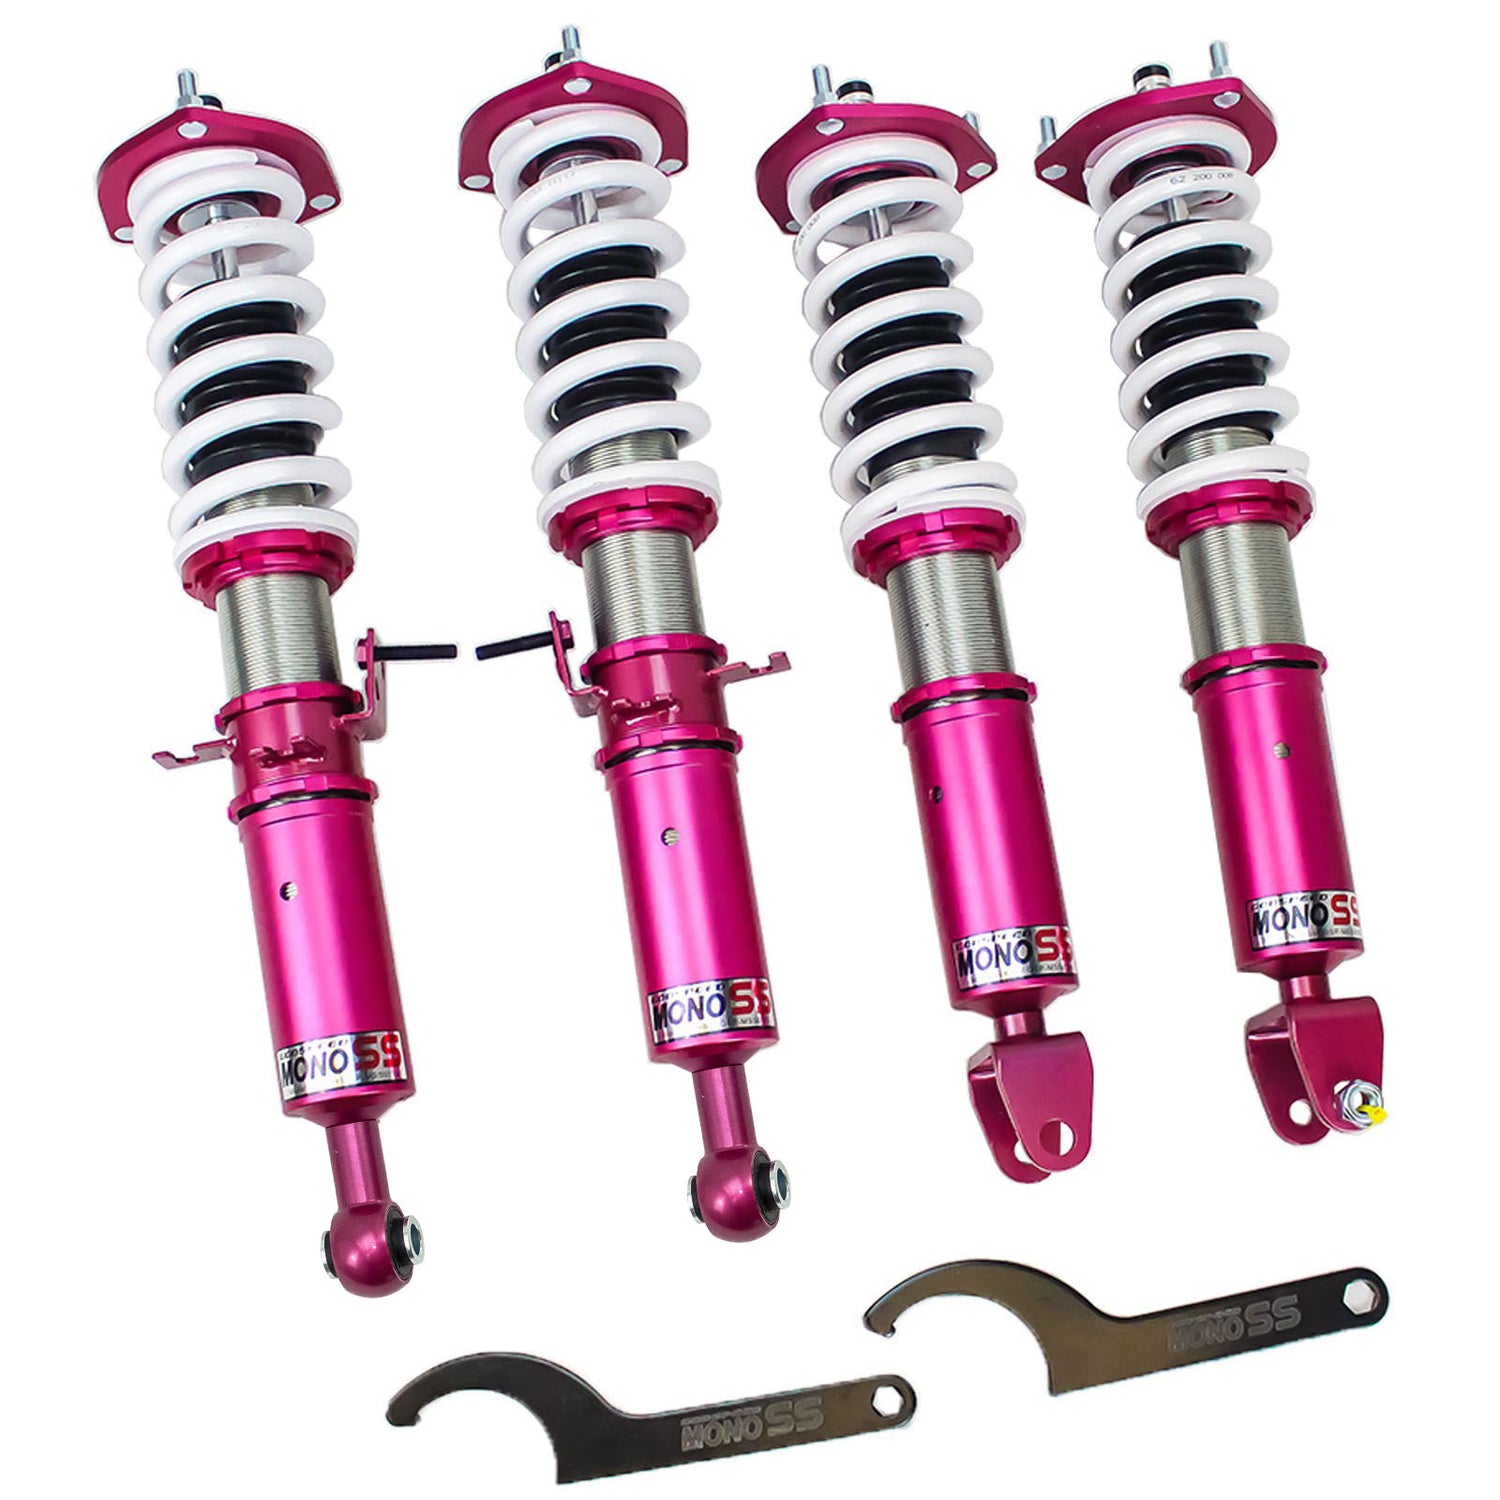 Godspeed MSS0119 MonoSS Coilover Lowering Kit, Fully Adjustable, Ride Height, Spring Tension And 16 Click Damping, Infiniti Q50(V37) RWD 2014-16